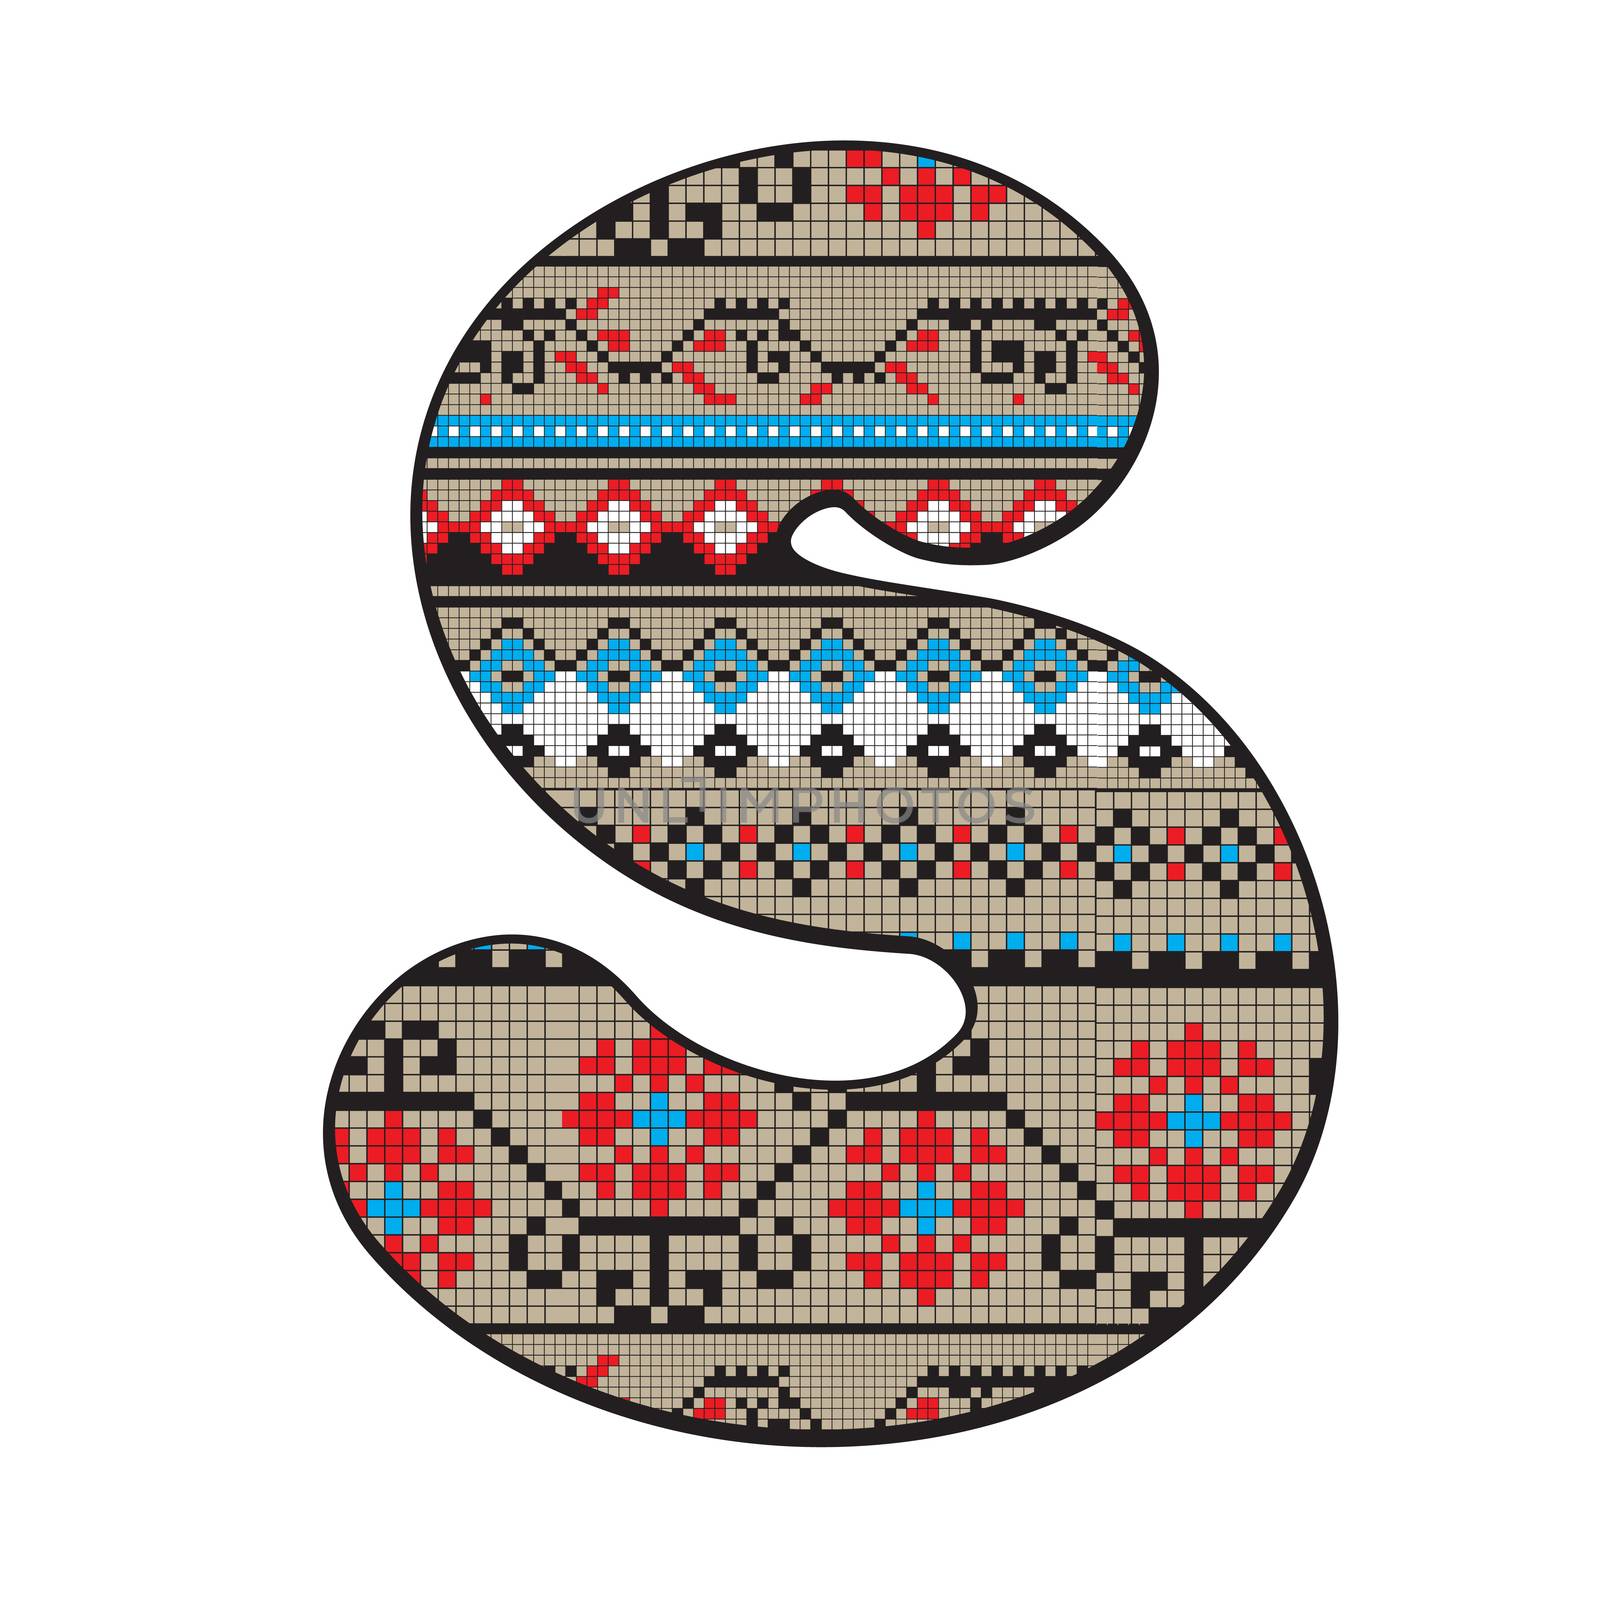 Decorated original font, pixel art ethnic model inspired by a Balkan motif over a funny fat capital letter S isolated on white